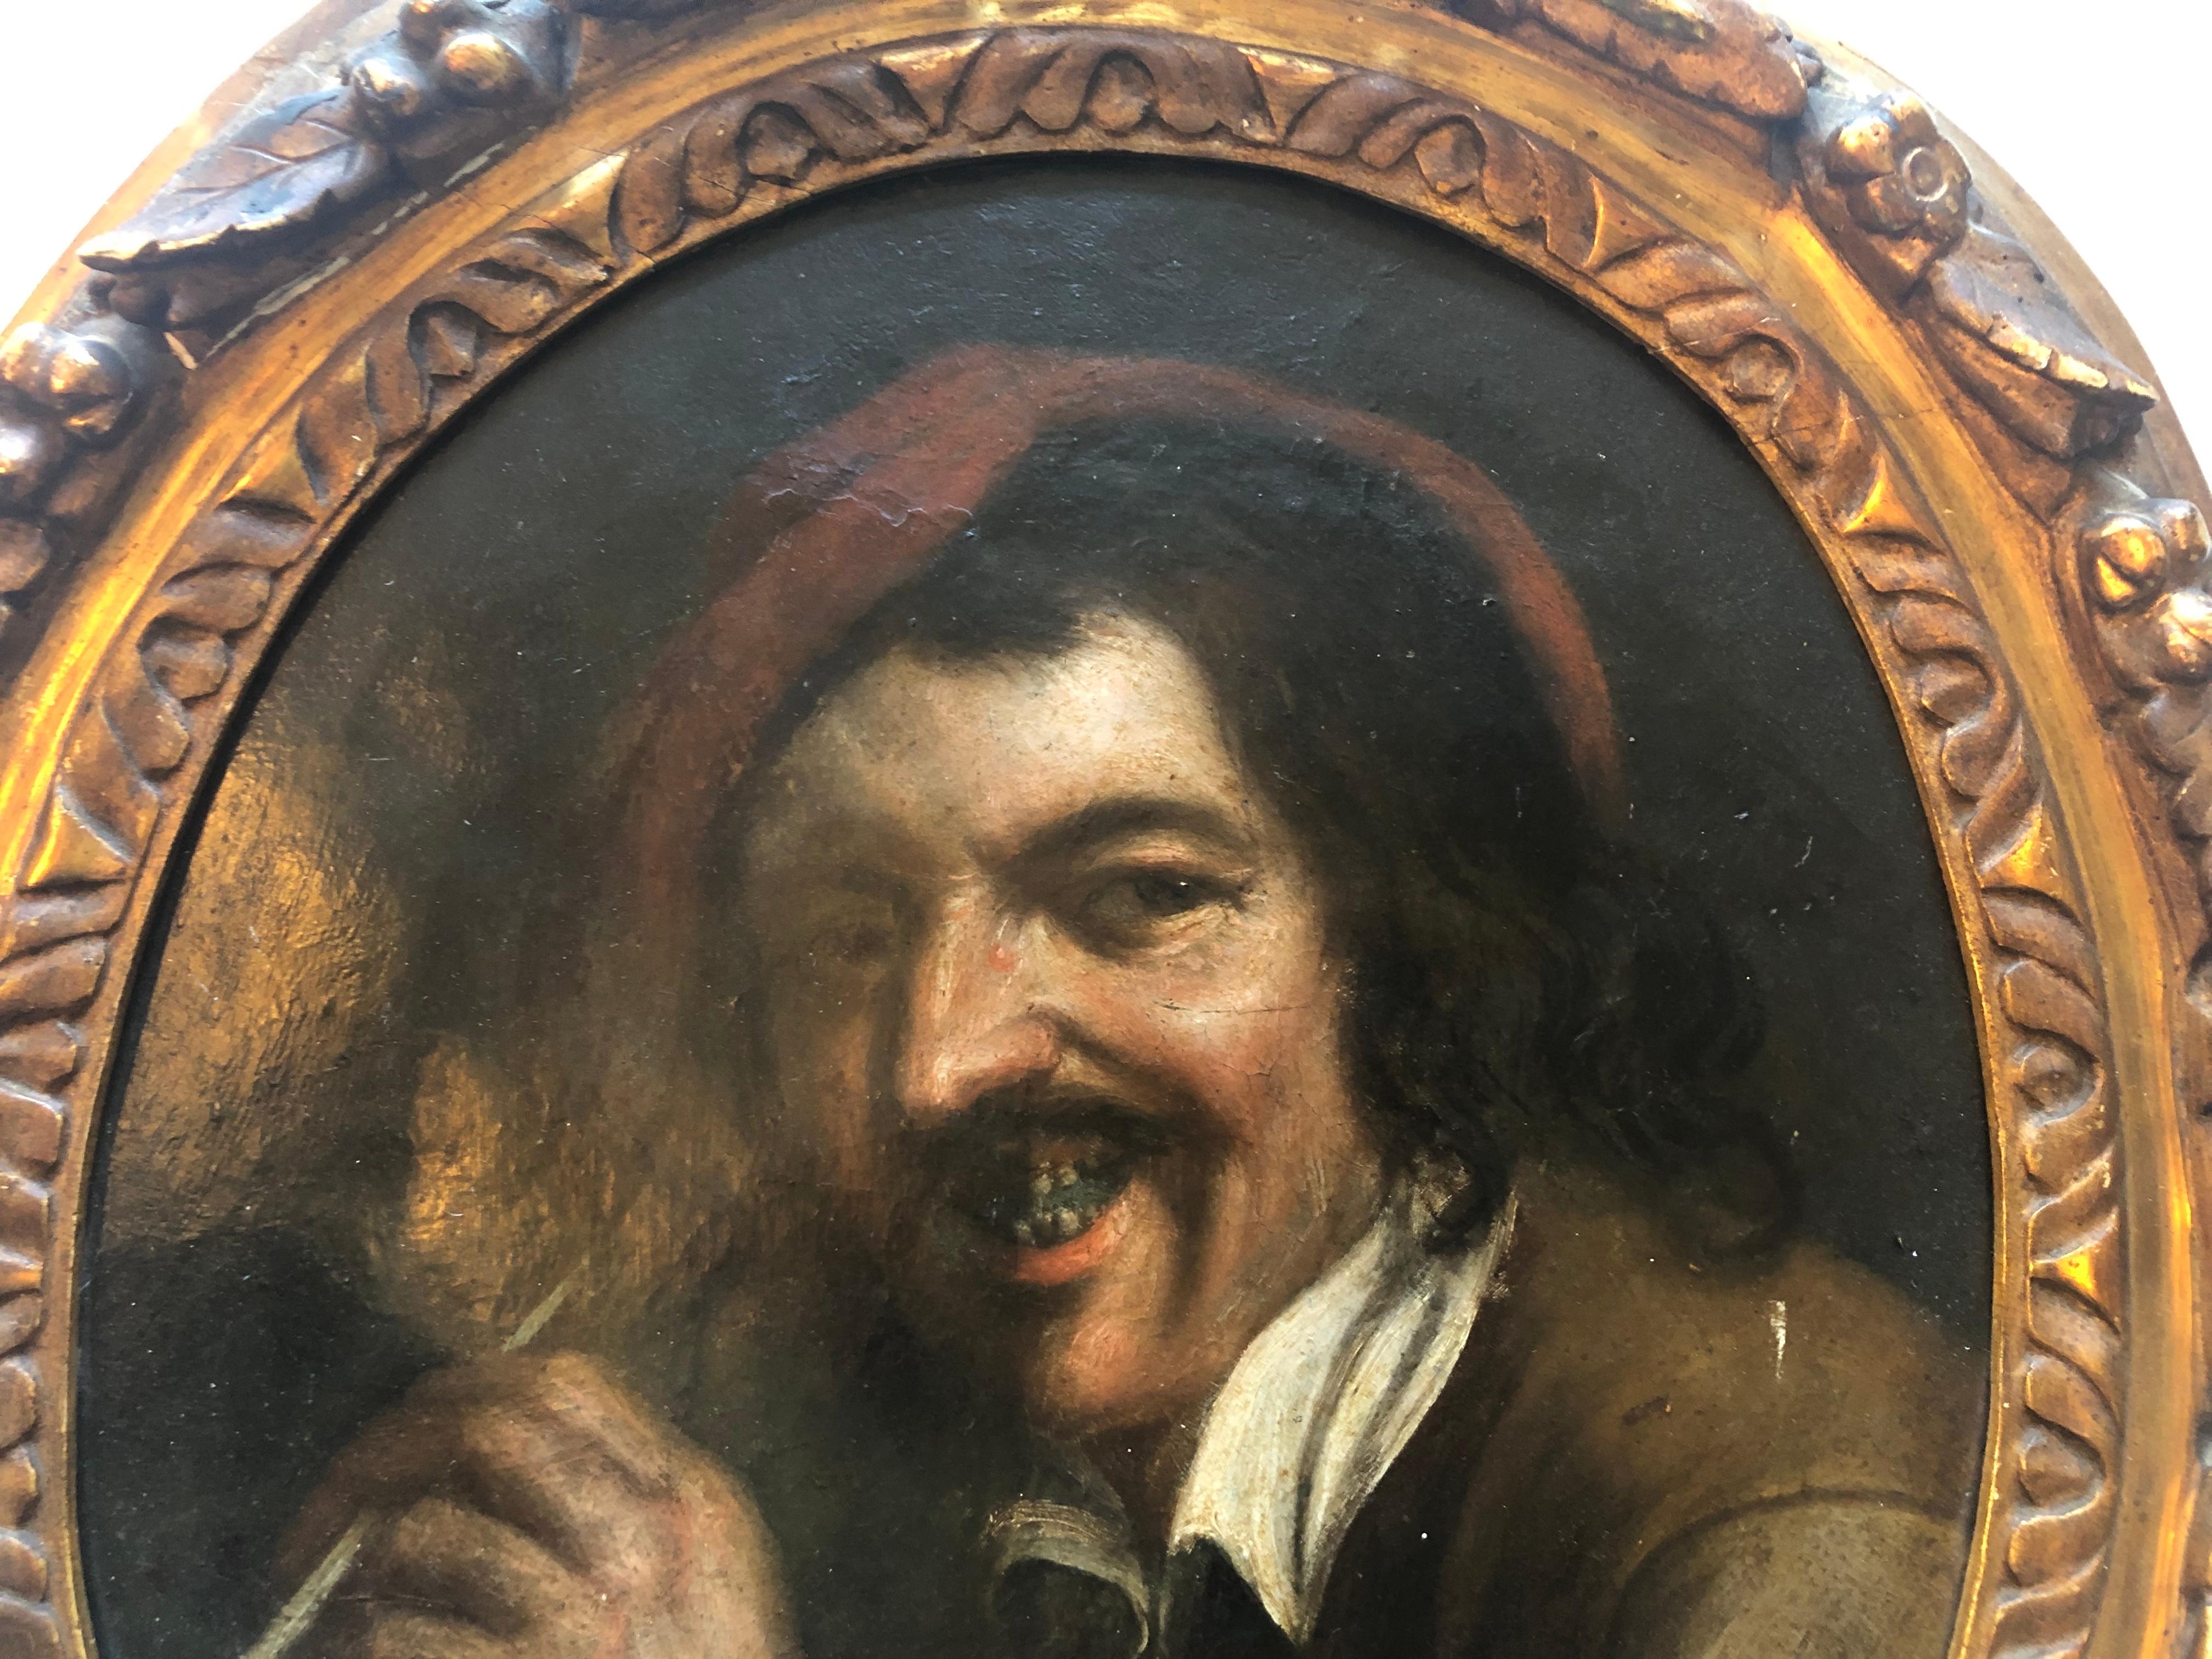 This is a framed 1700s Flemish oil on canvas painting representing a pipe smoker of that time. The oval wooden gilded frame is a stunning work of art itself, carved with leafs, nuts, flowers and scrolls. The artist is unknown, but the quality of the